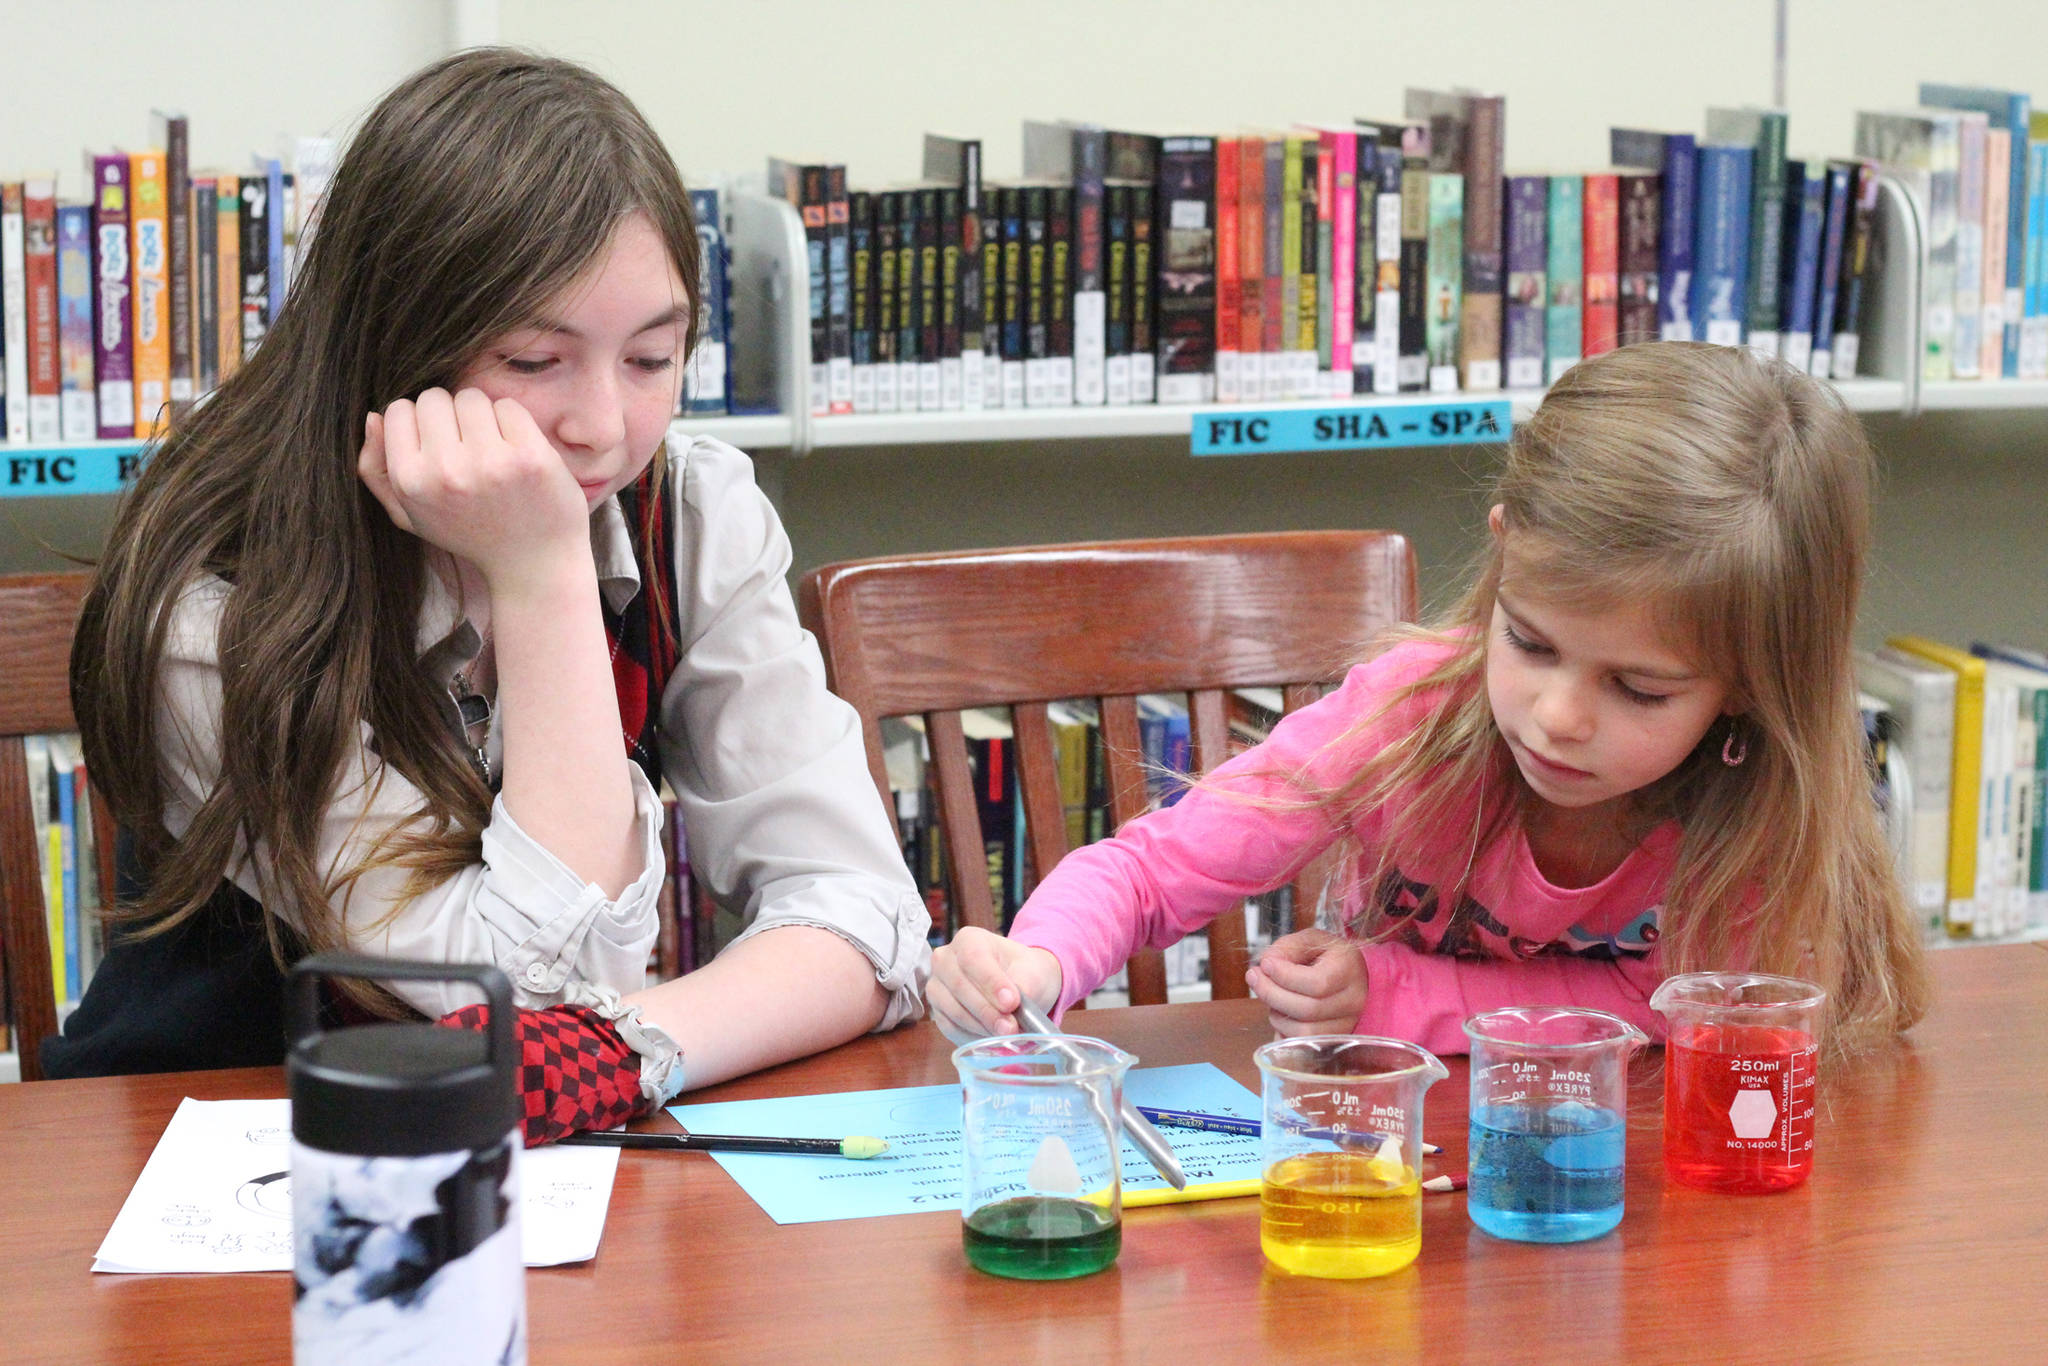 Jade Stewart (left) watches her mentee from Paul Banks Elementary School, Jillian Koran, perform an experiment at one of five stations Tuesday, Oct. 24, 2017 at Homer Middle School in Homer, Alaska. First grade students were paired up with eighth graders for a lesson on the science of sound through a mentorship program. (Photo by Megan Pacer/Homer News)